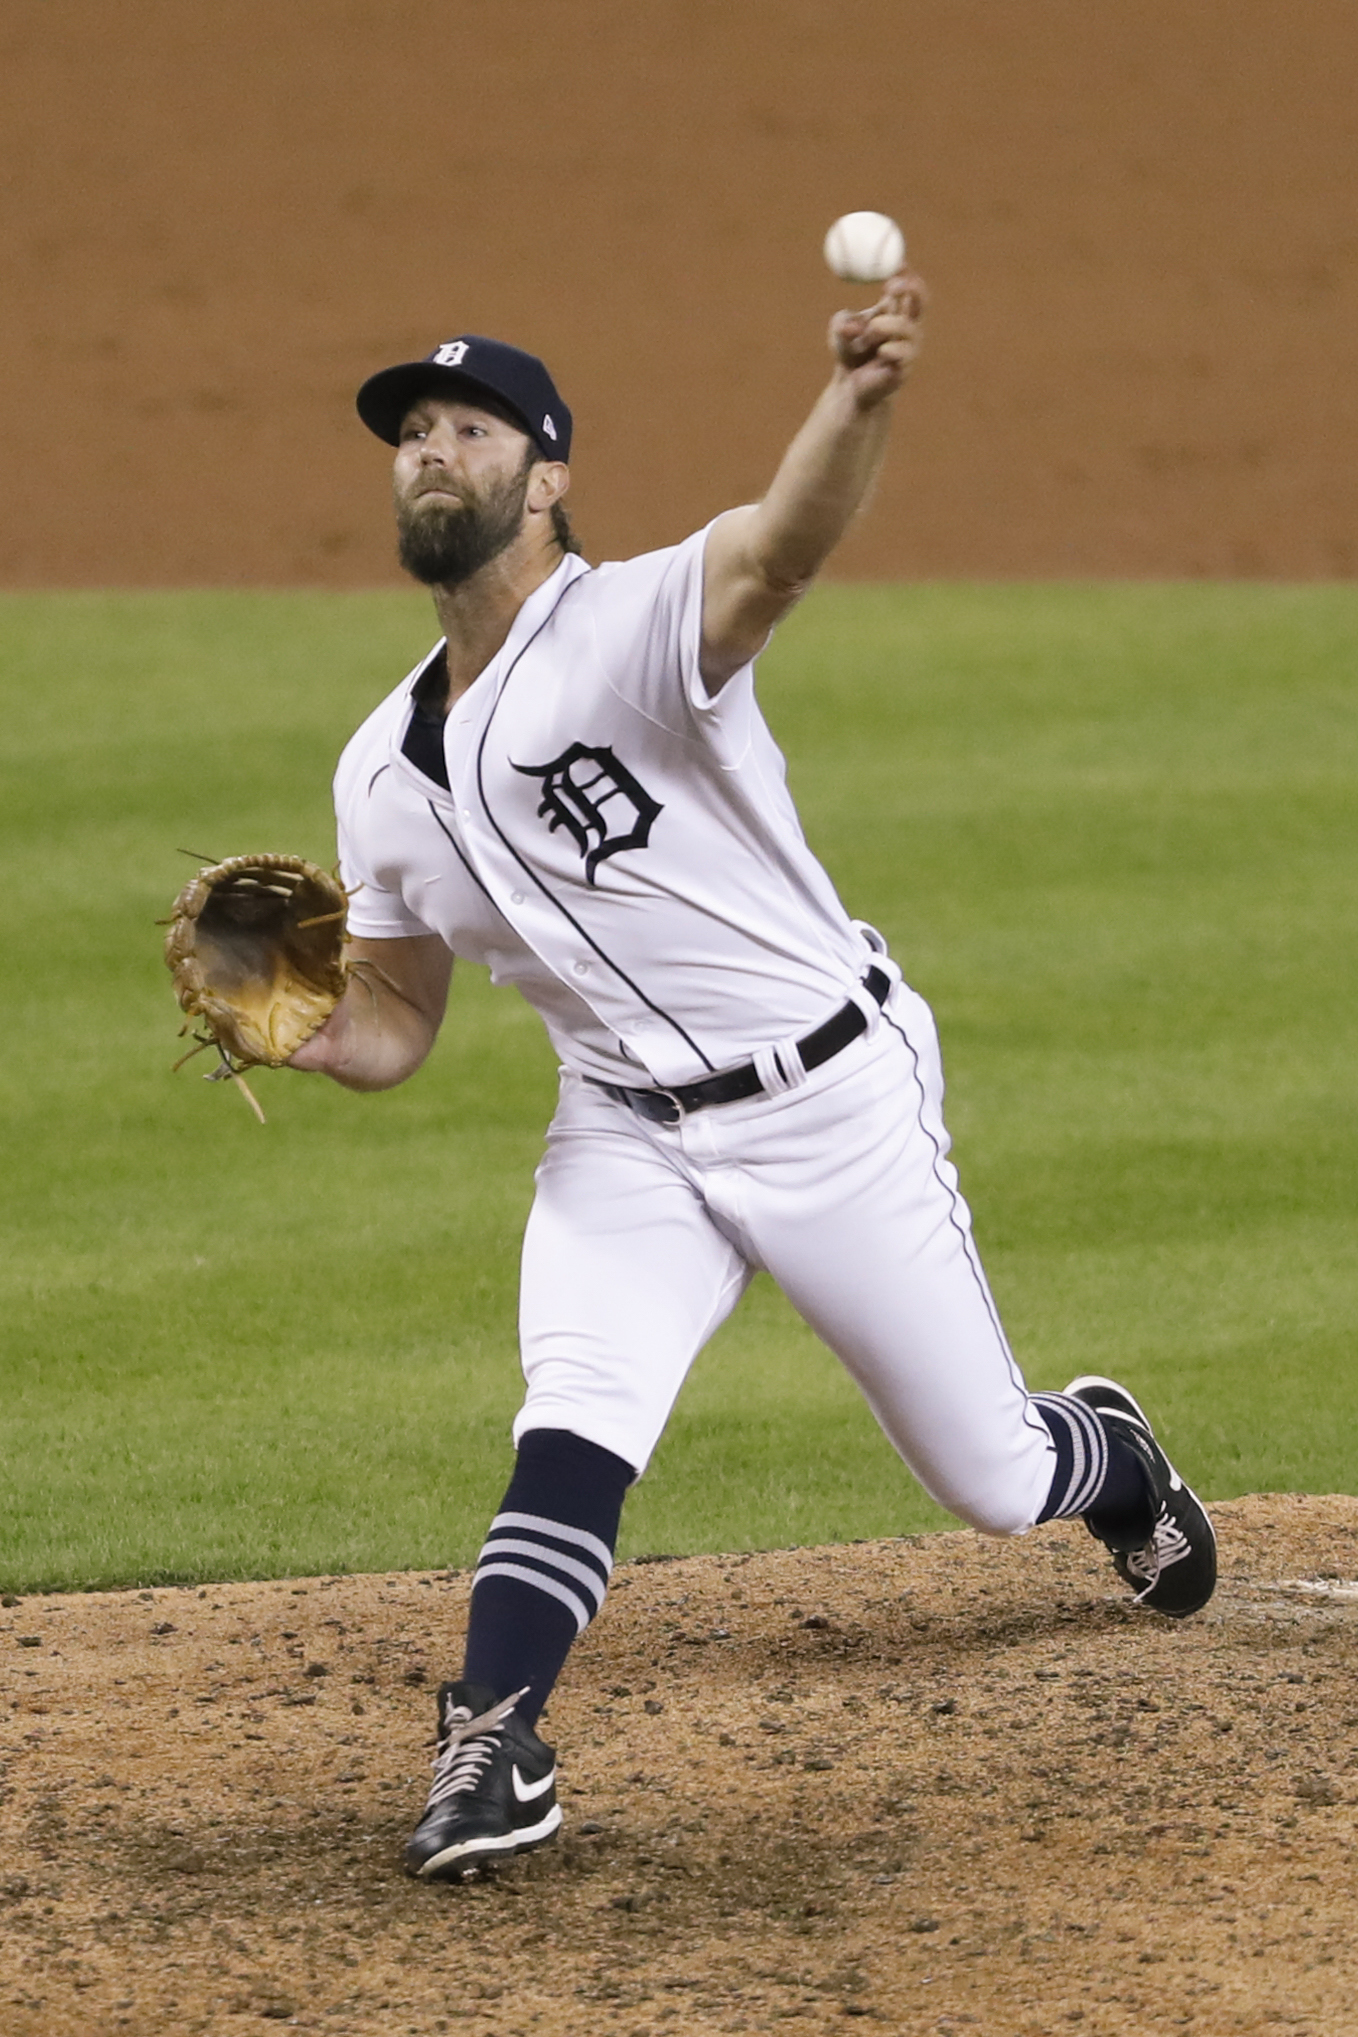 Daniel Norris, Reese Olson and the Tigers' trade deadline dynamics